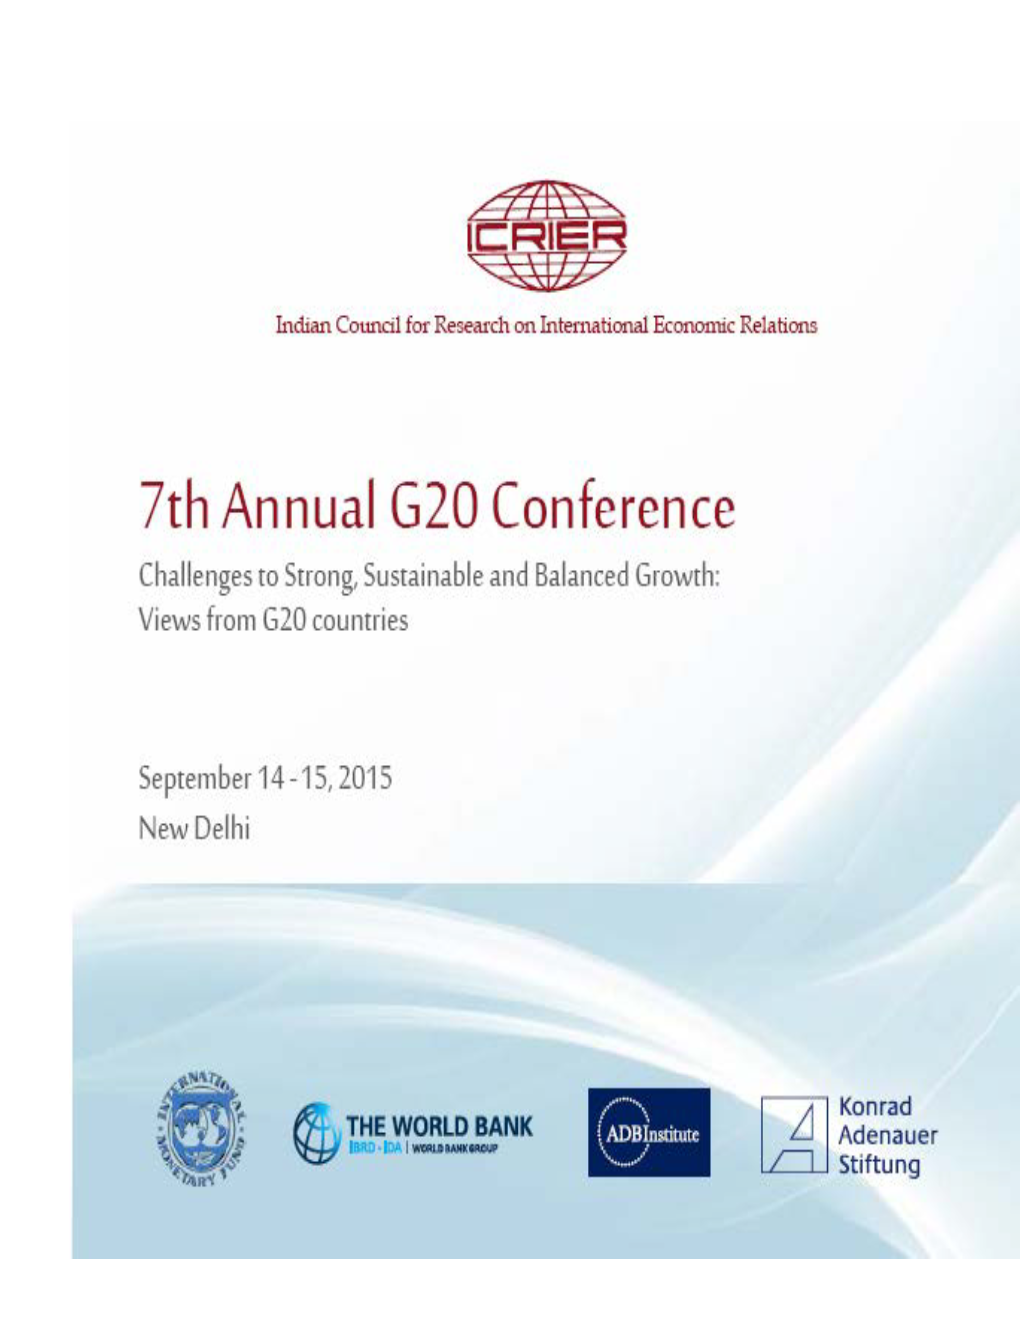 Views from G20 Countries ICRIER, September 14- 15, 2015